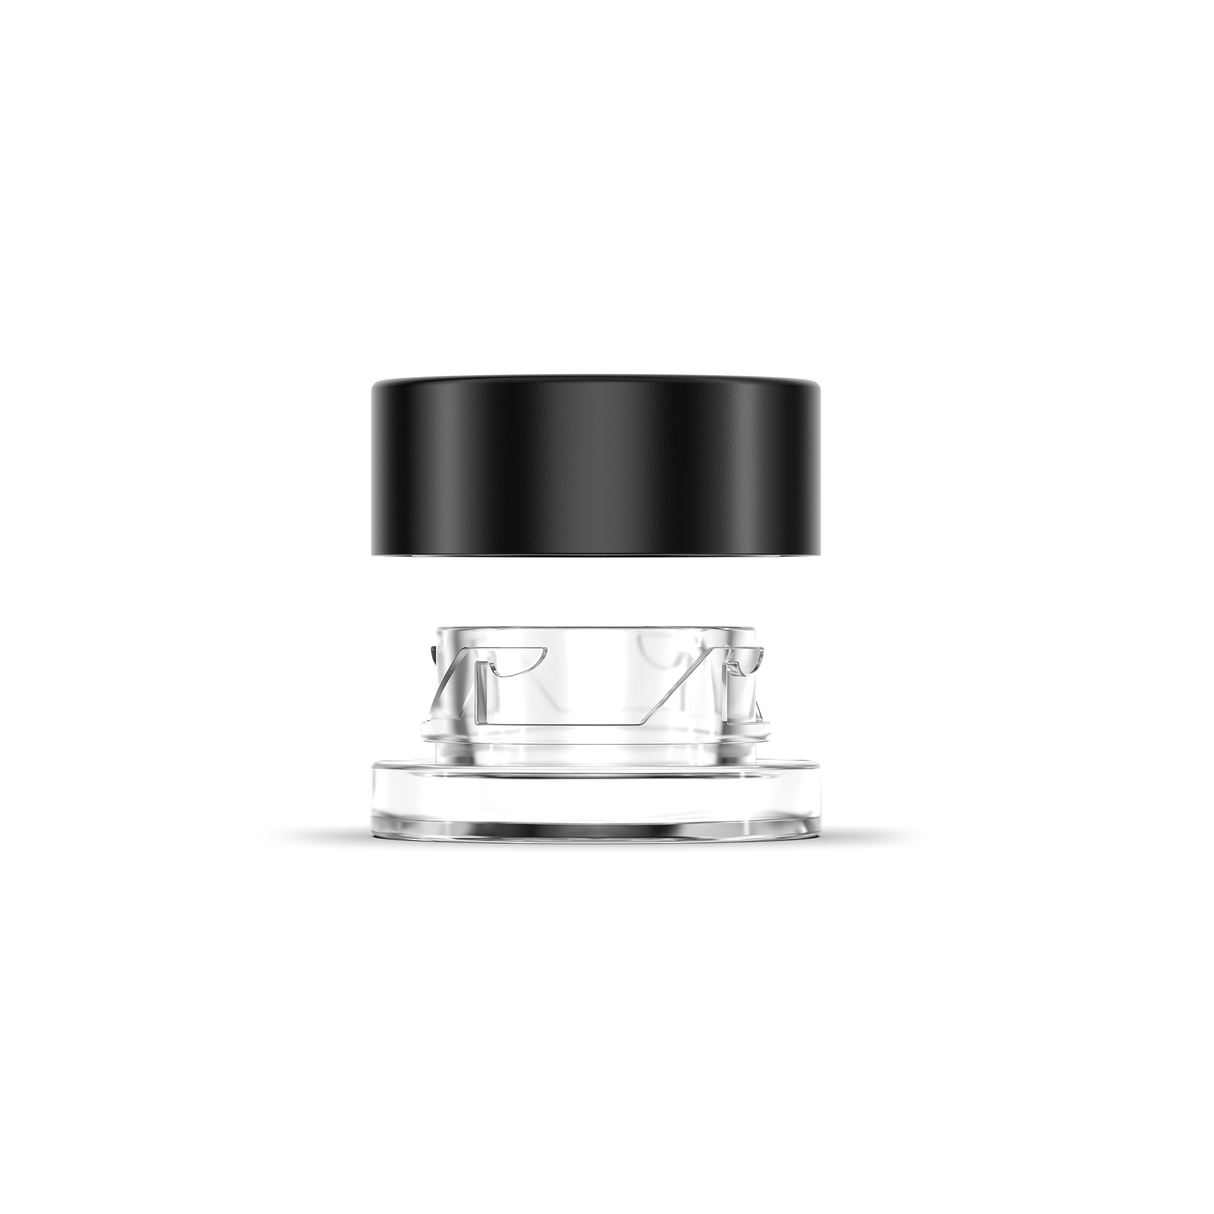 9ml Child Resistant Glass Concentrate Jar